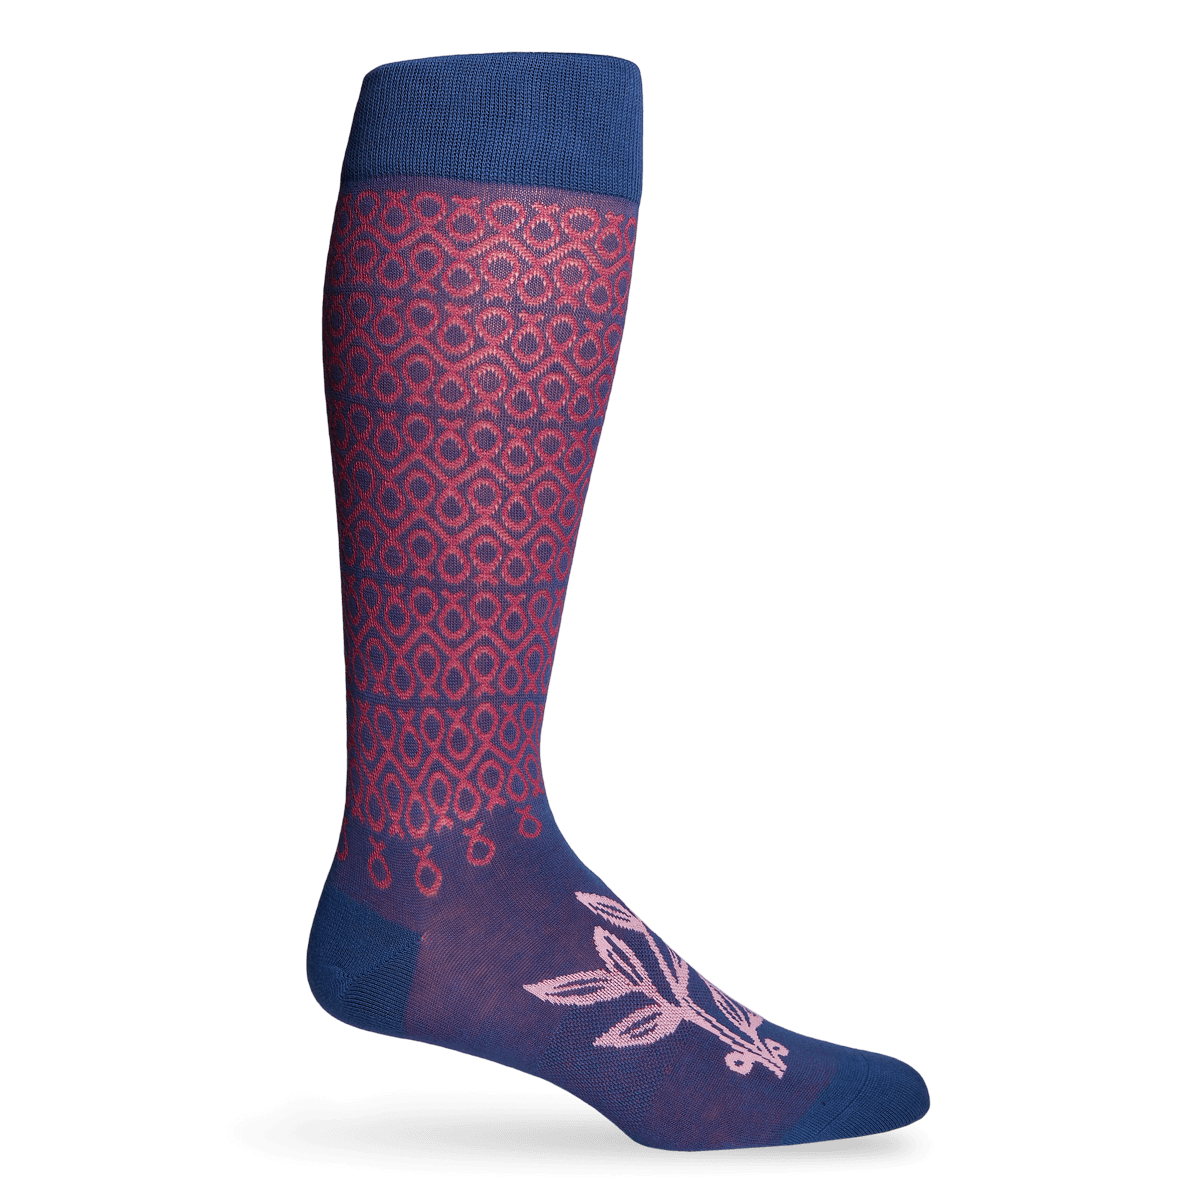 NBCF - Blue with Dark Pink Connected Ribbons